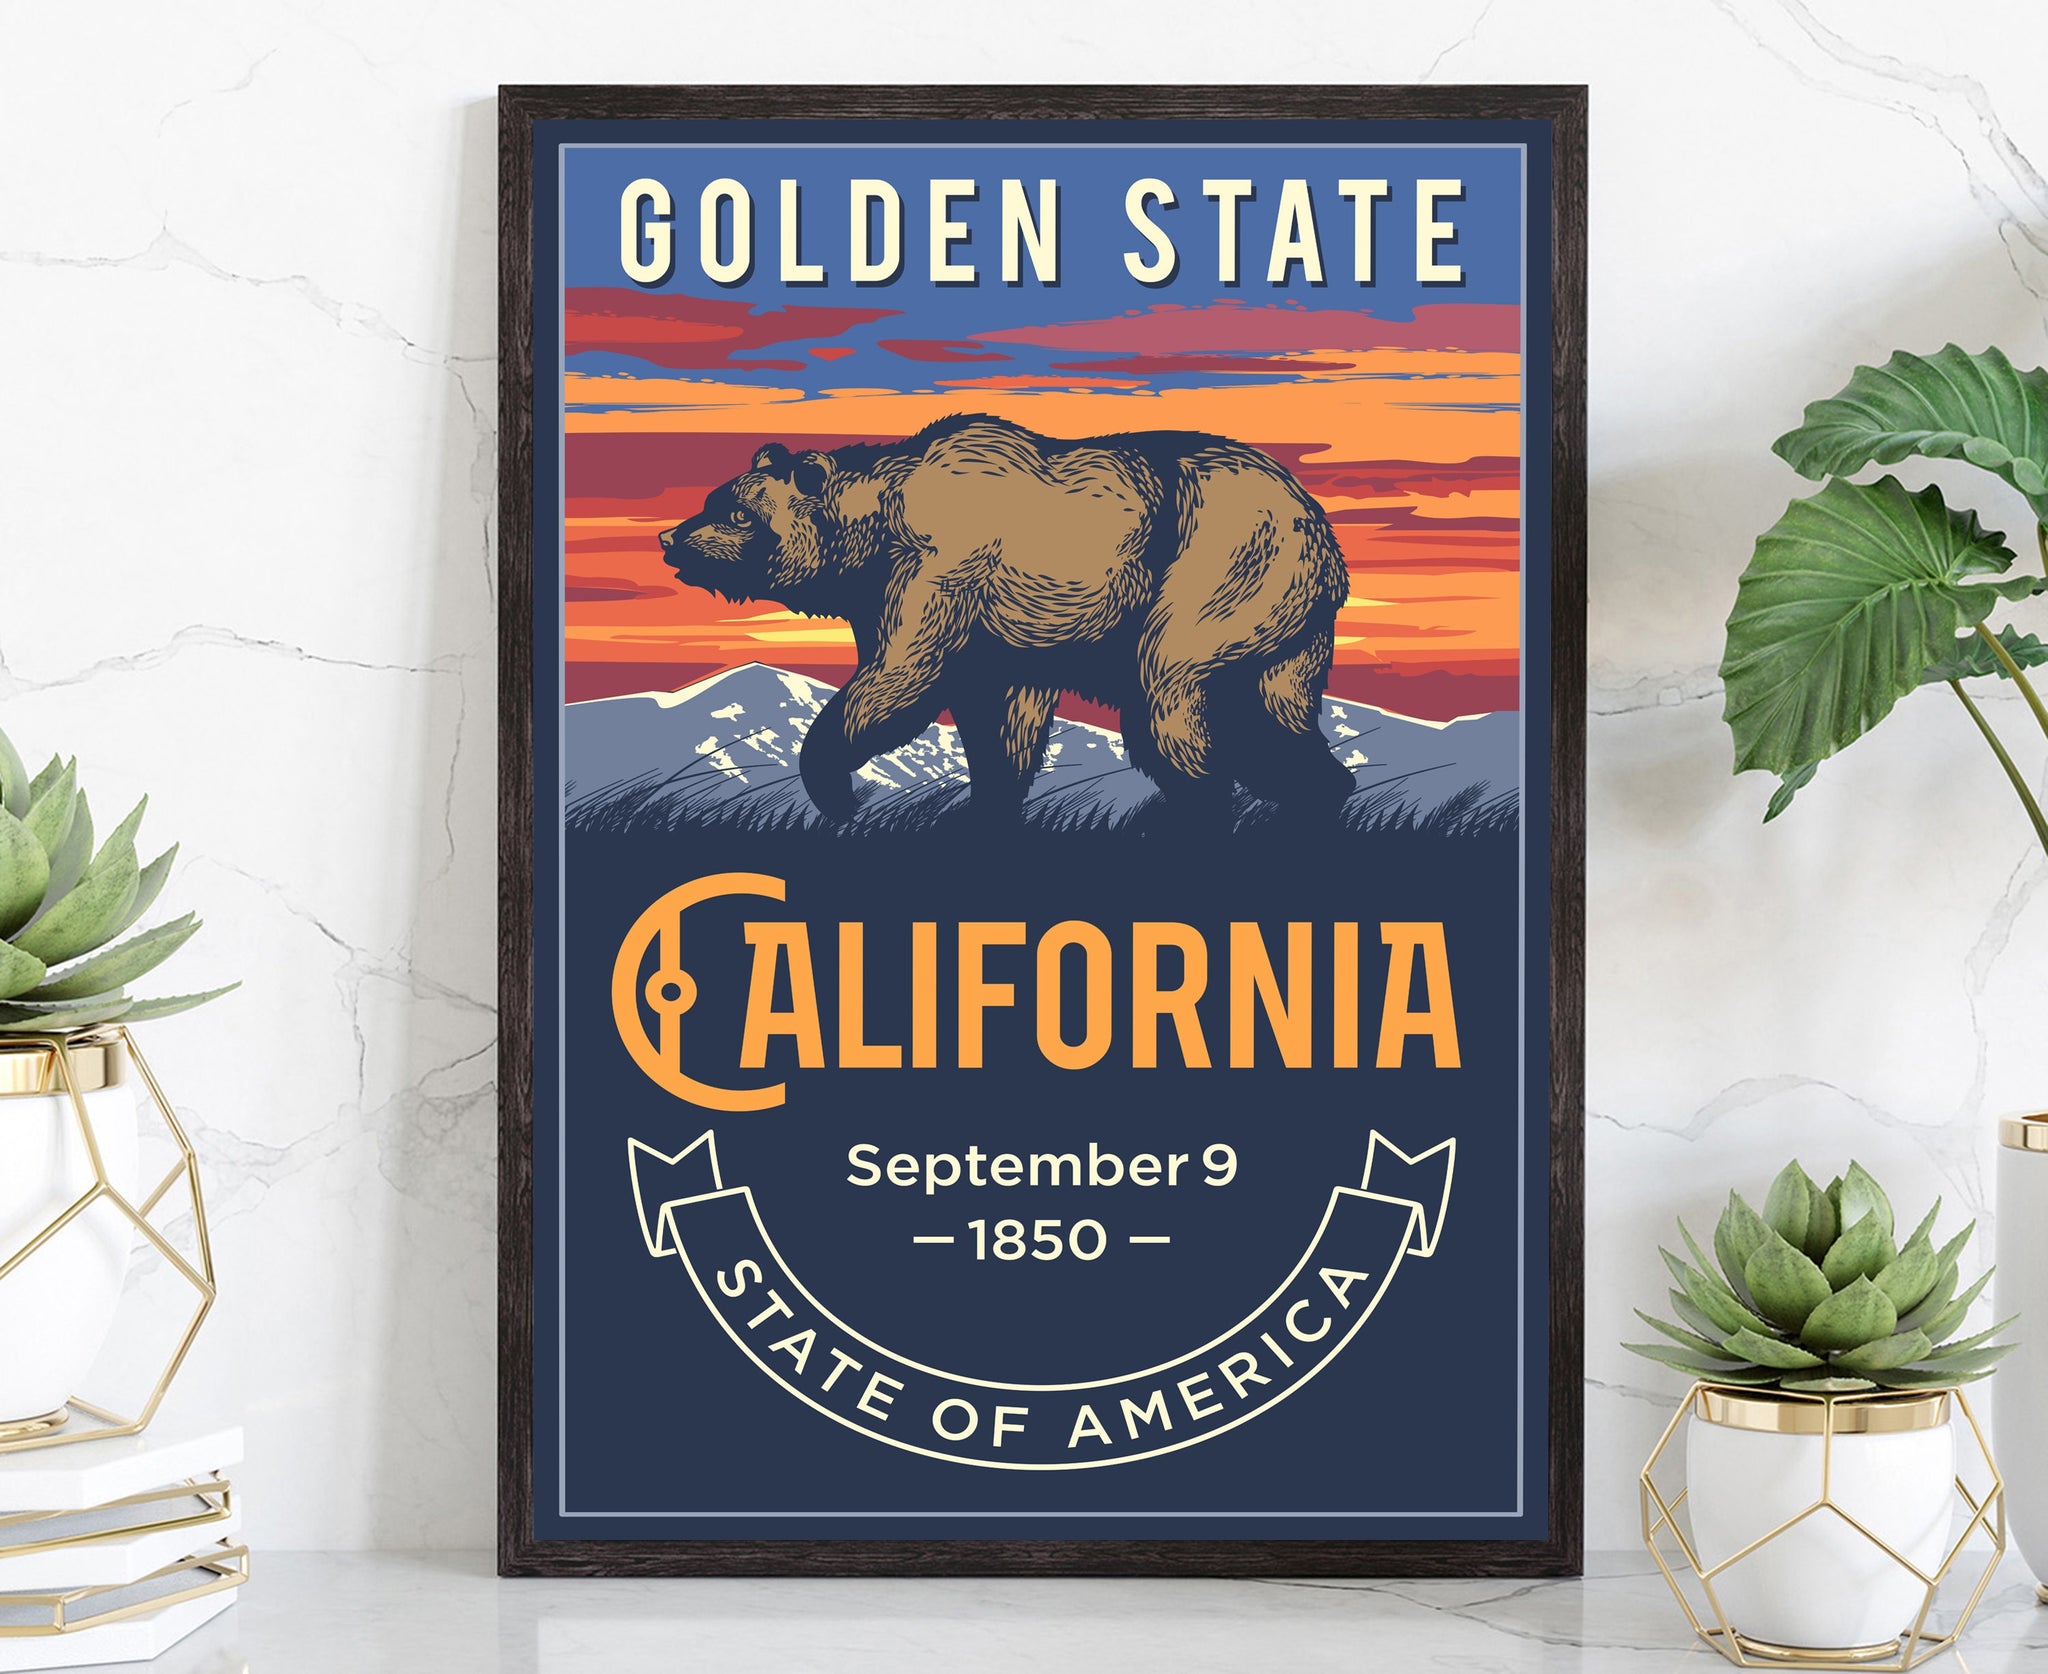 United States California State Poster, California Poster Print, California State Emblem Poster, Retro Travel State Poster, Office Wall Art